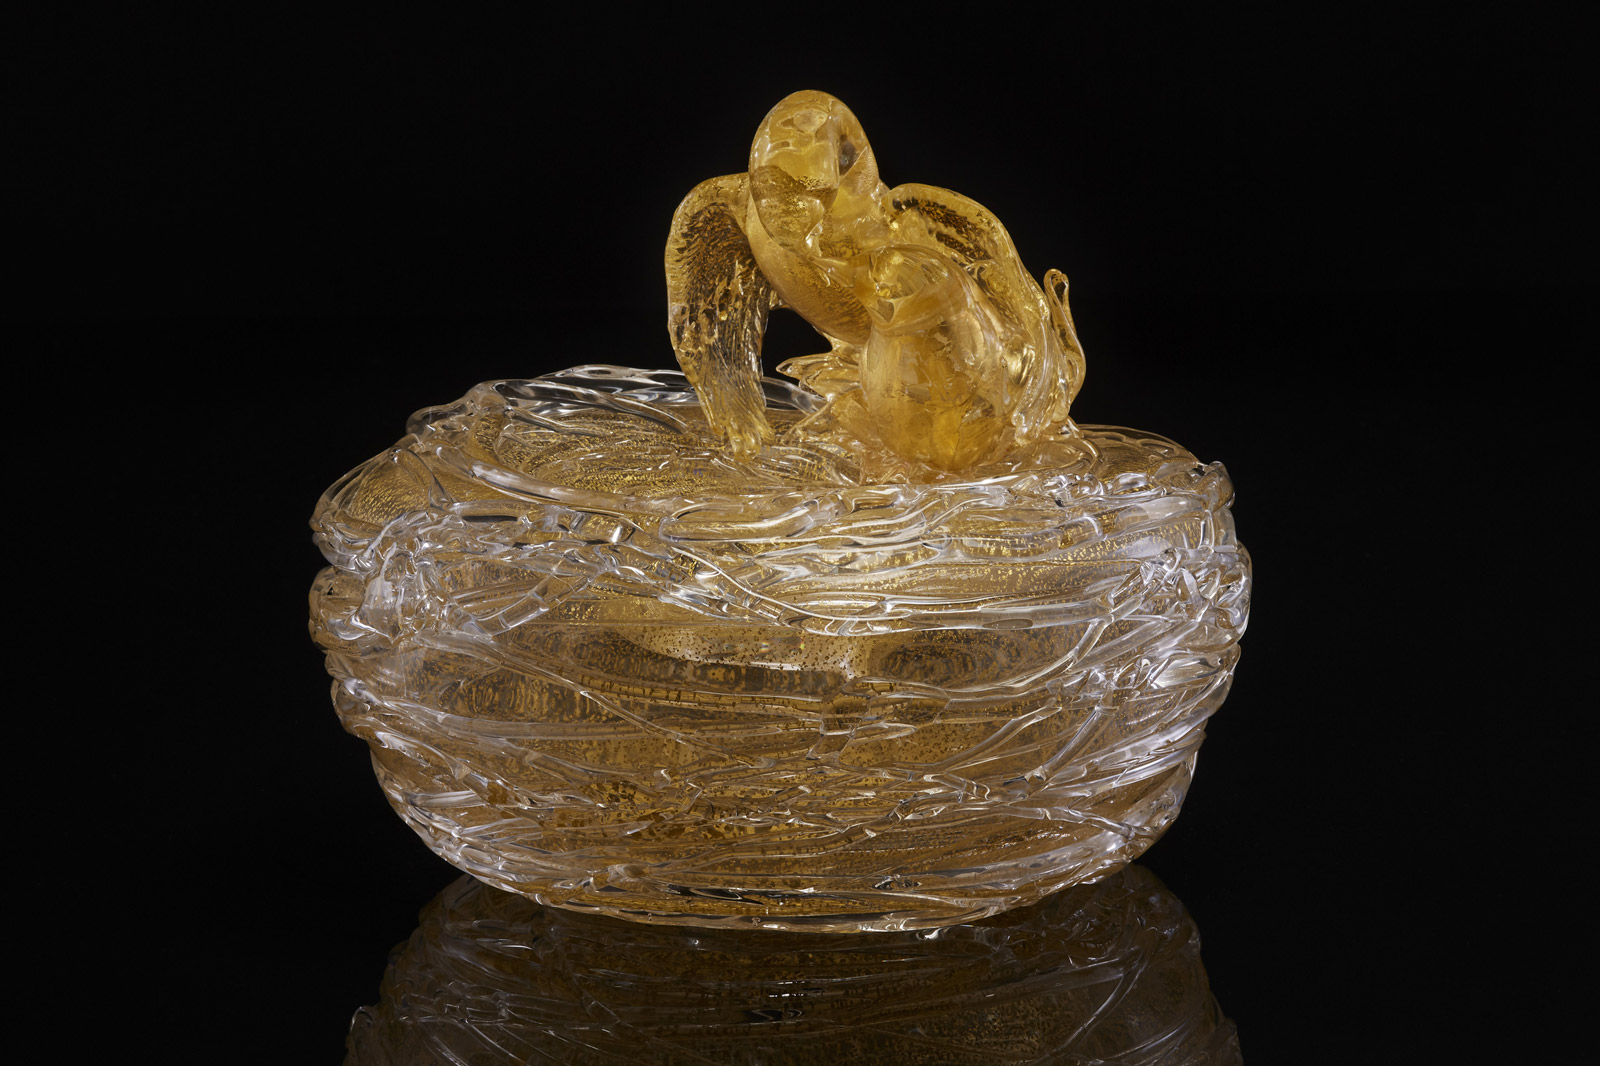 Dale Chihuly, Clear and Gilded Love Birds on Nest, 2013